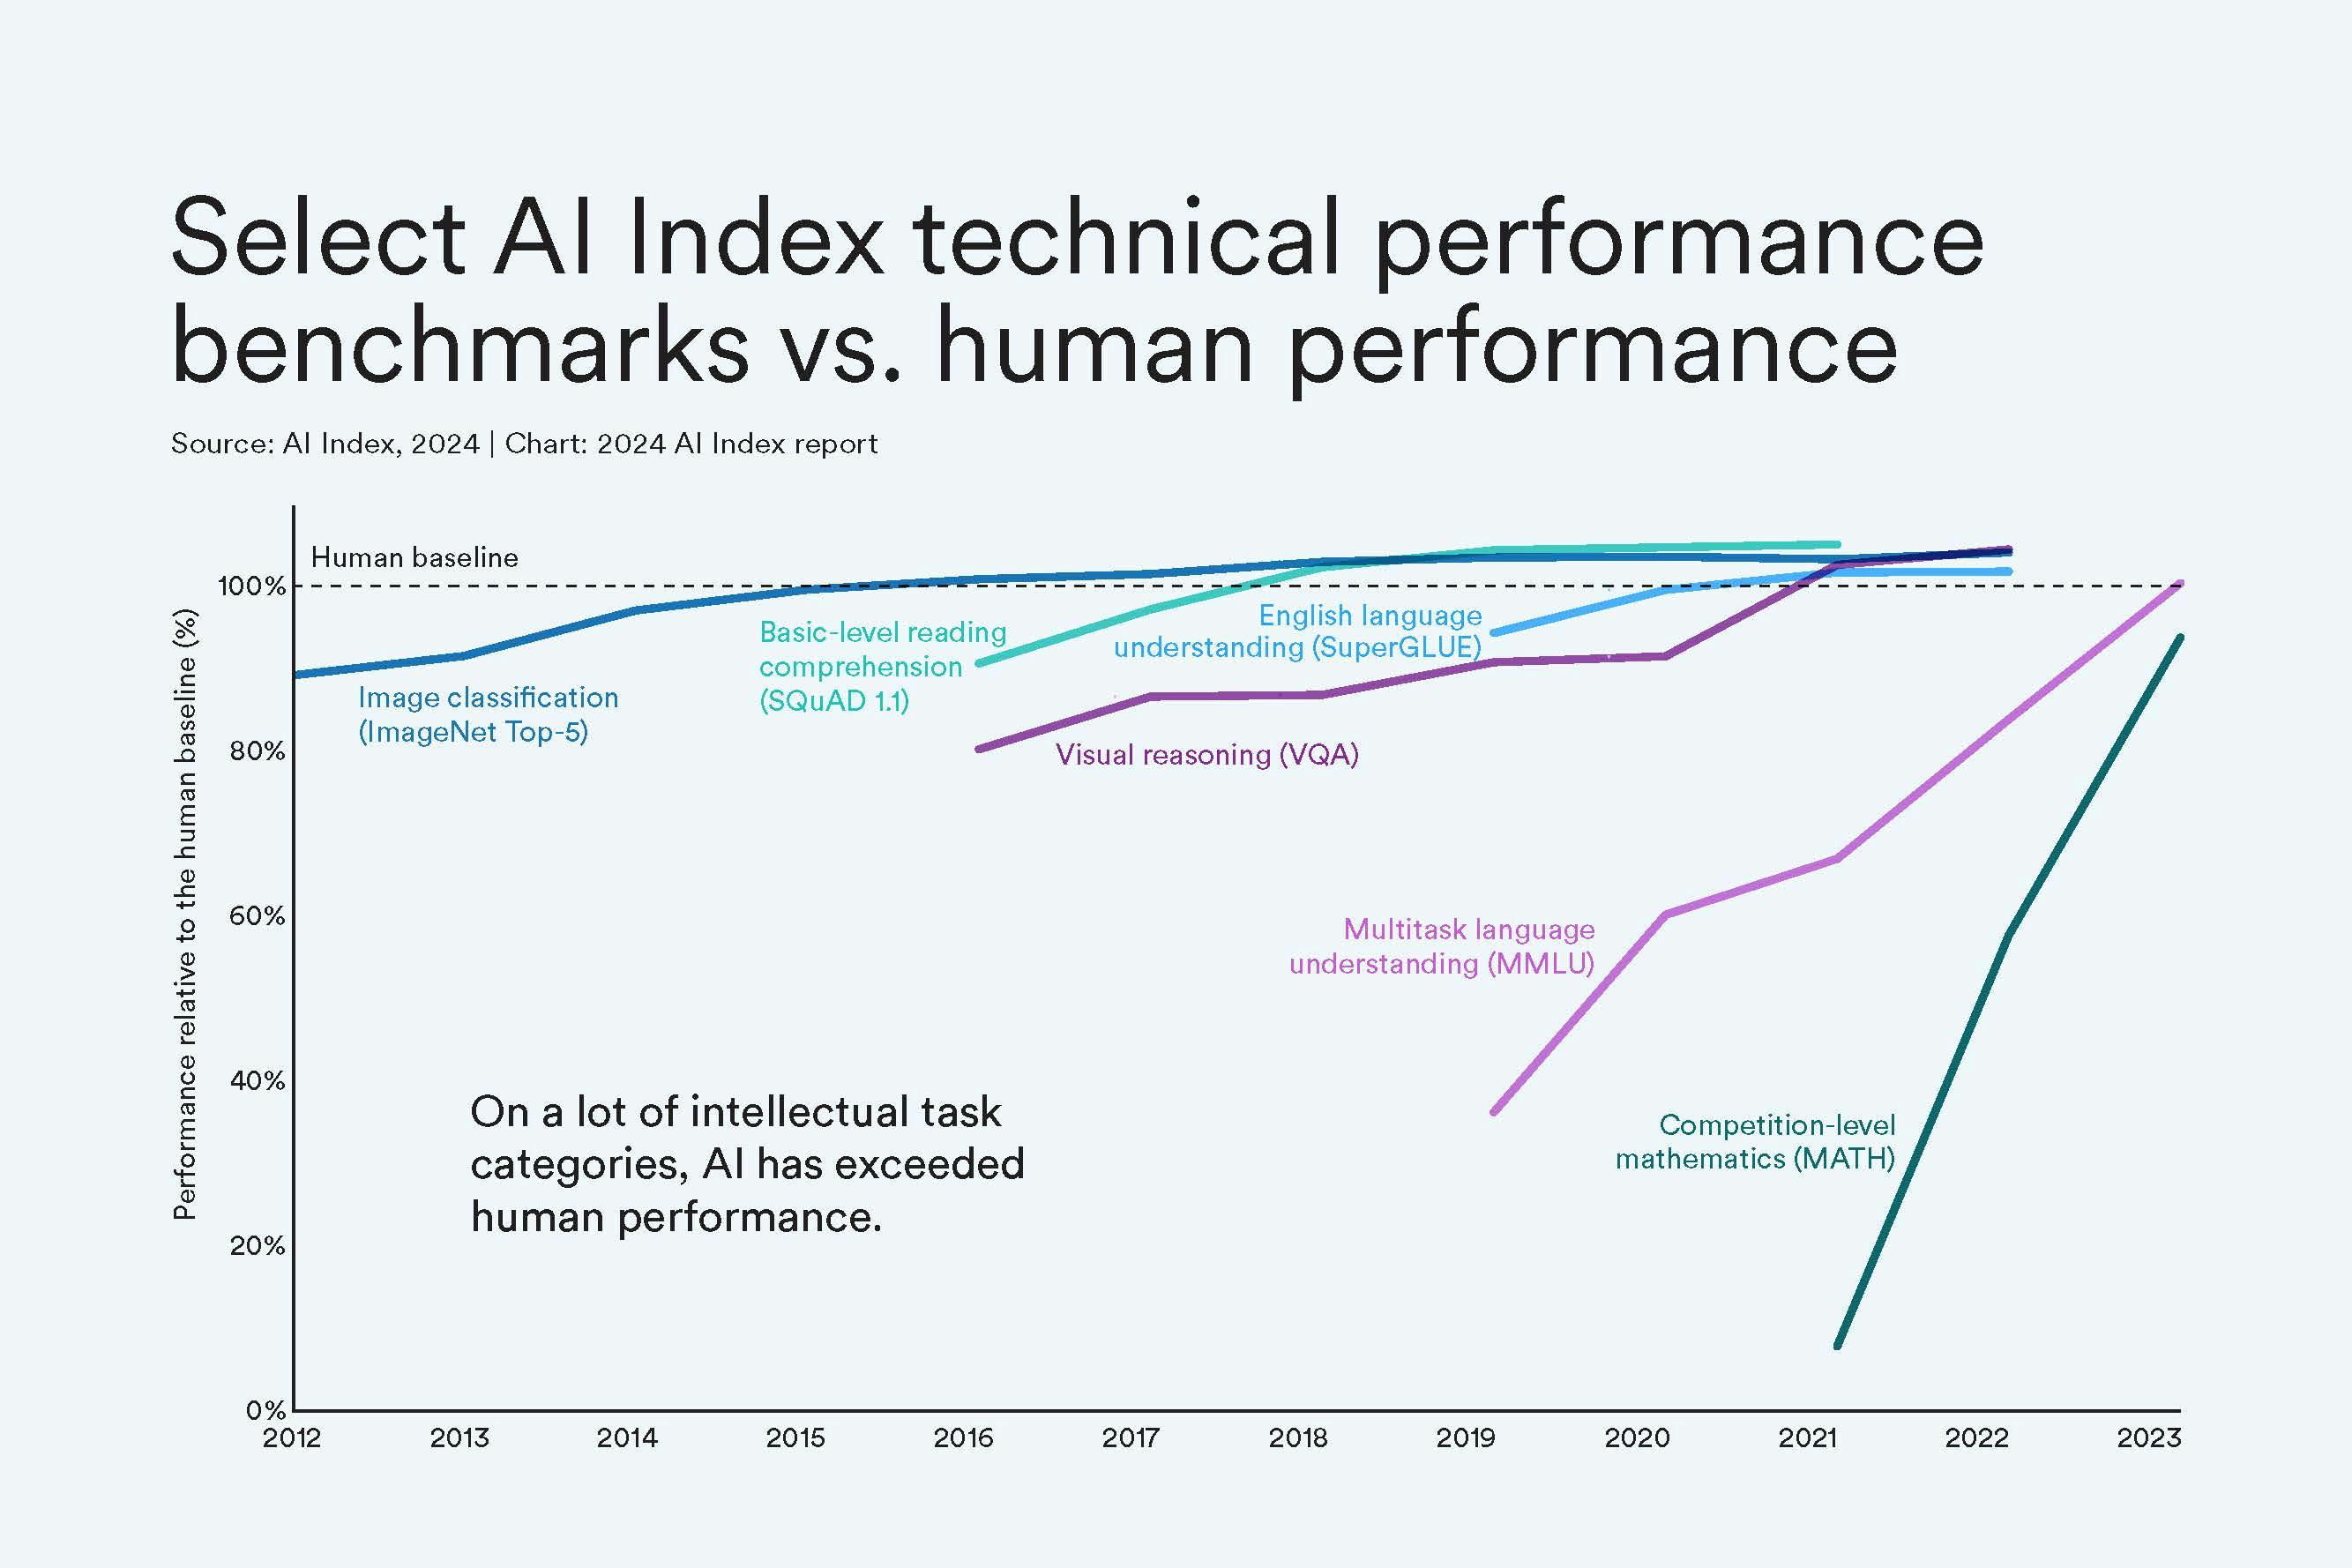 5rqoMbeZsxHQVCi8evwzfN Exploring Global AI Trends: Insights from the AI Index 2024 Report by Stanford HAI